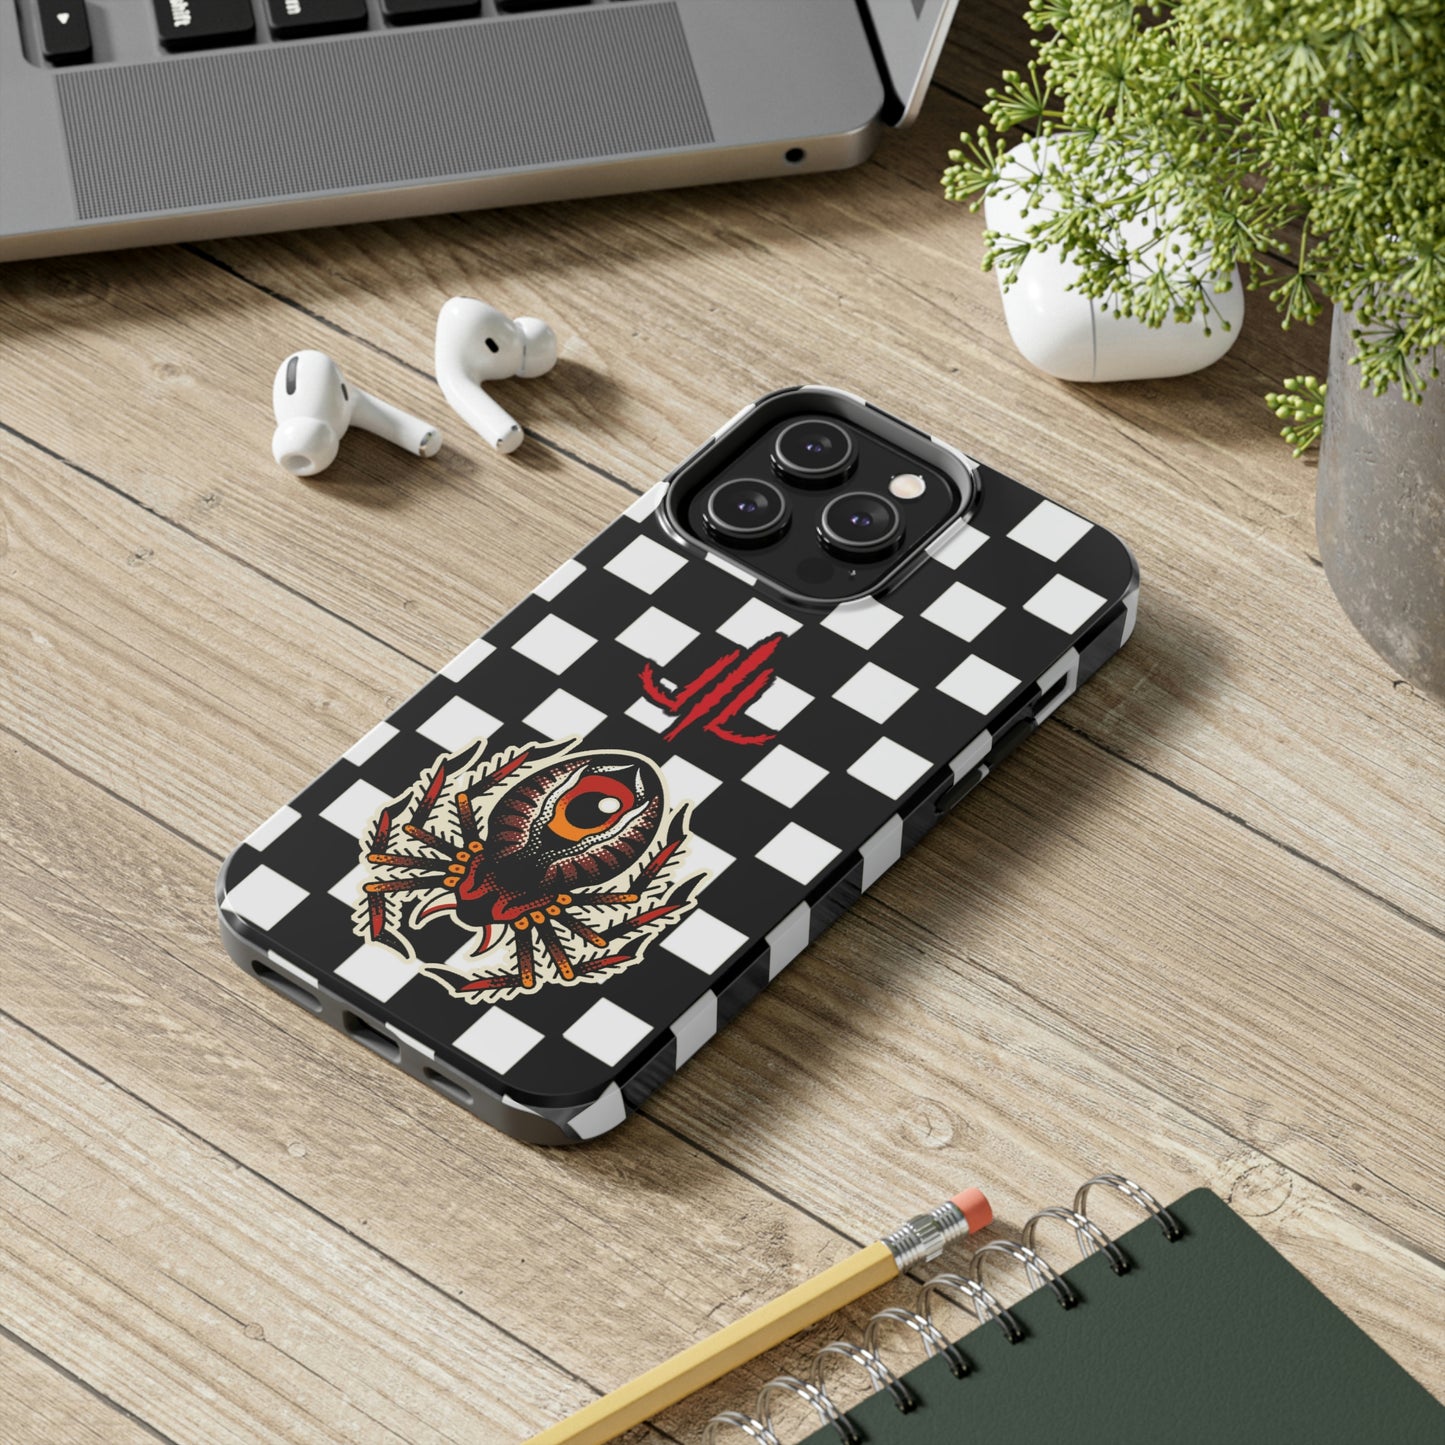 Traditional Spider Tough Case For Iphone